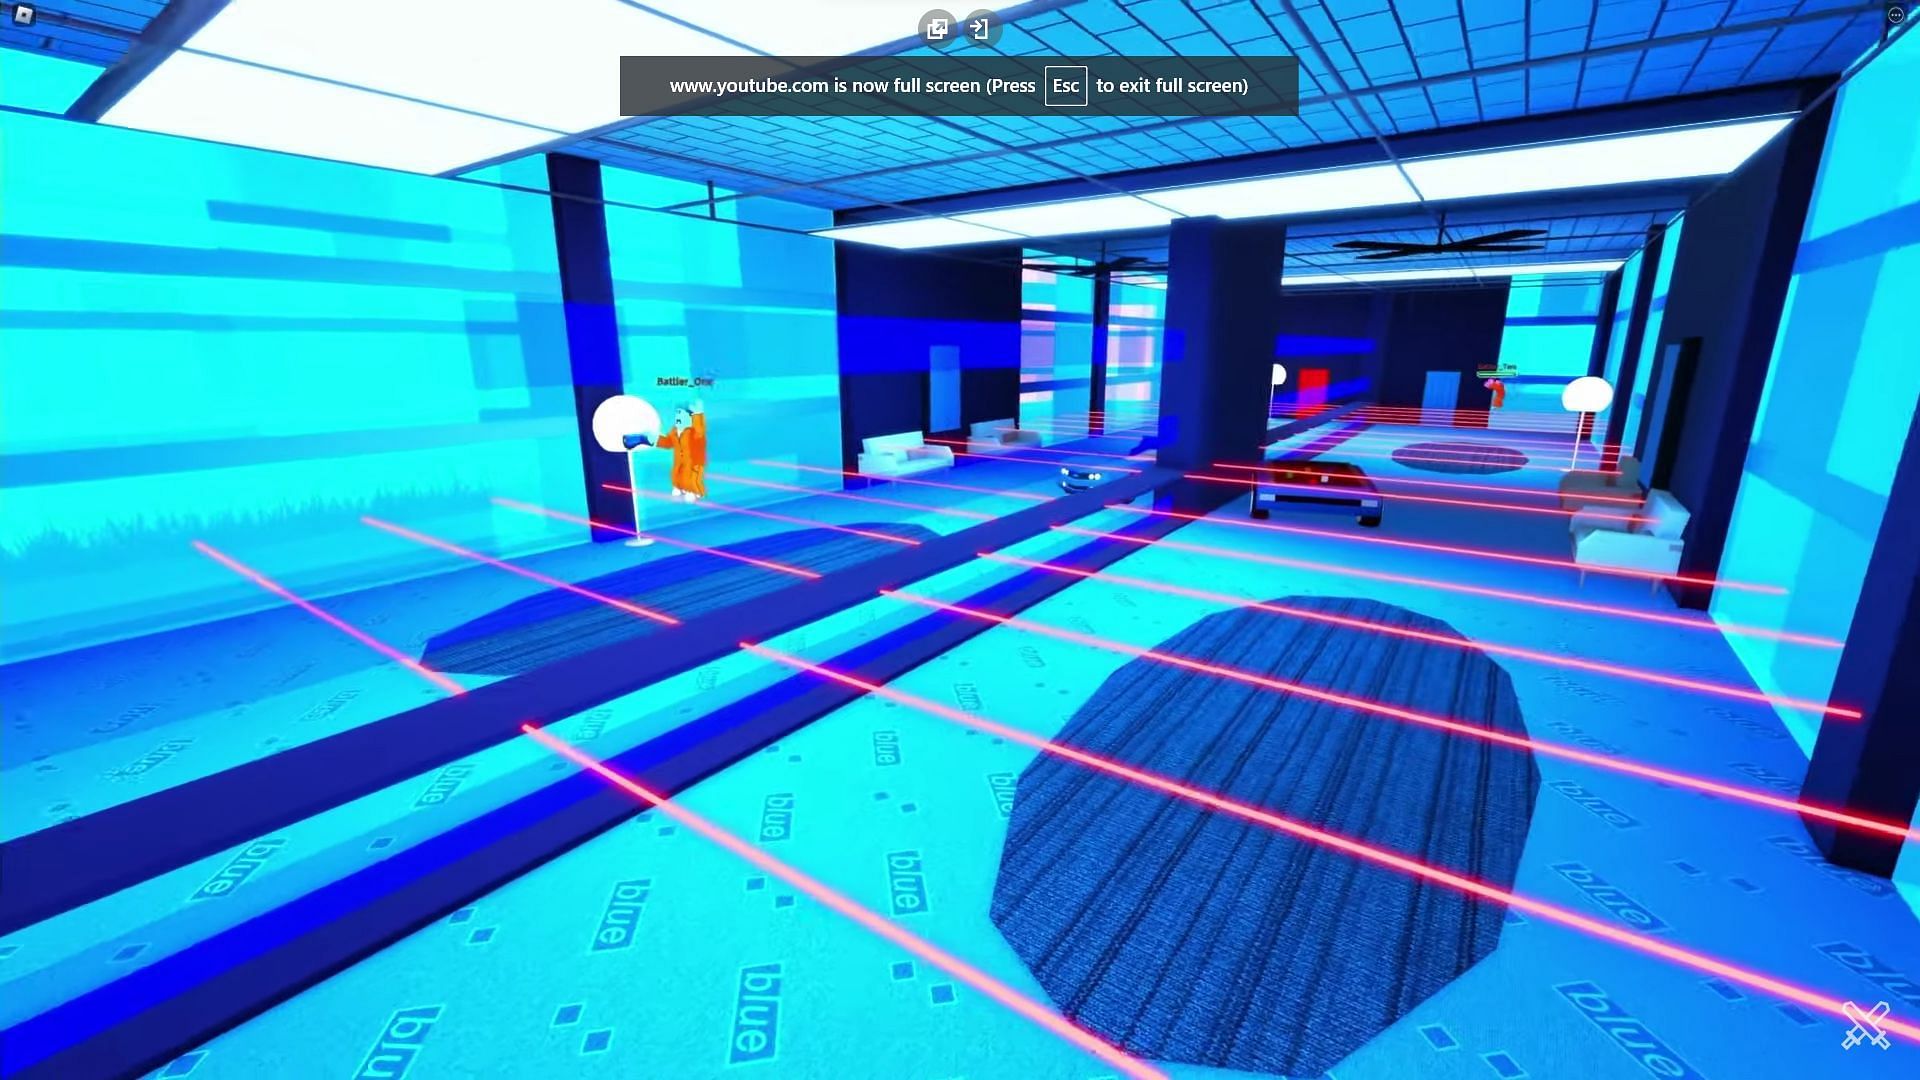 TanqR got past the laser round, while PinkLeaf struggled (Image via Roblox Battles/YouTube)